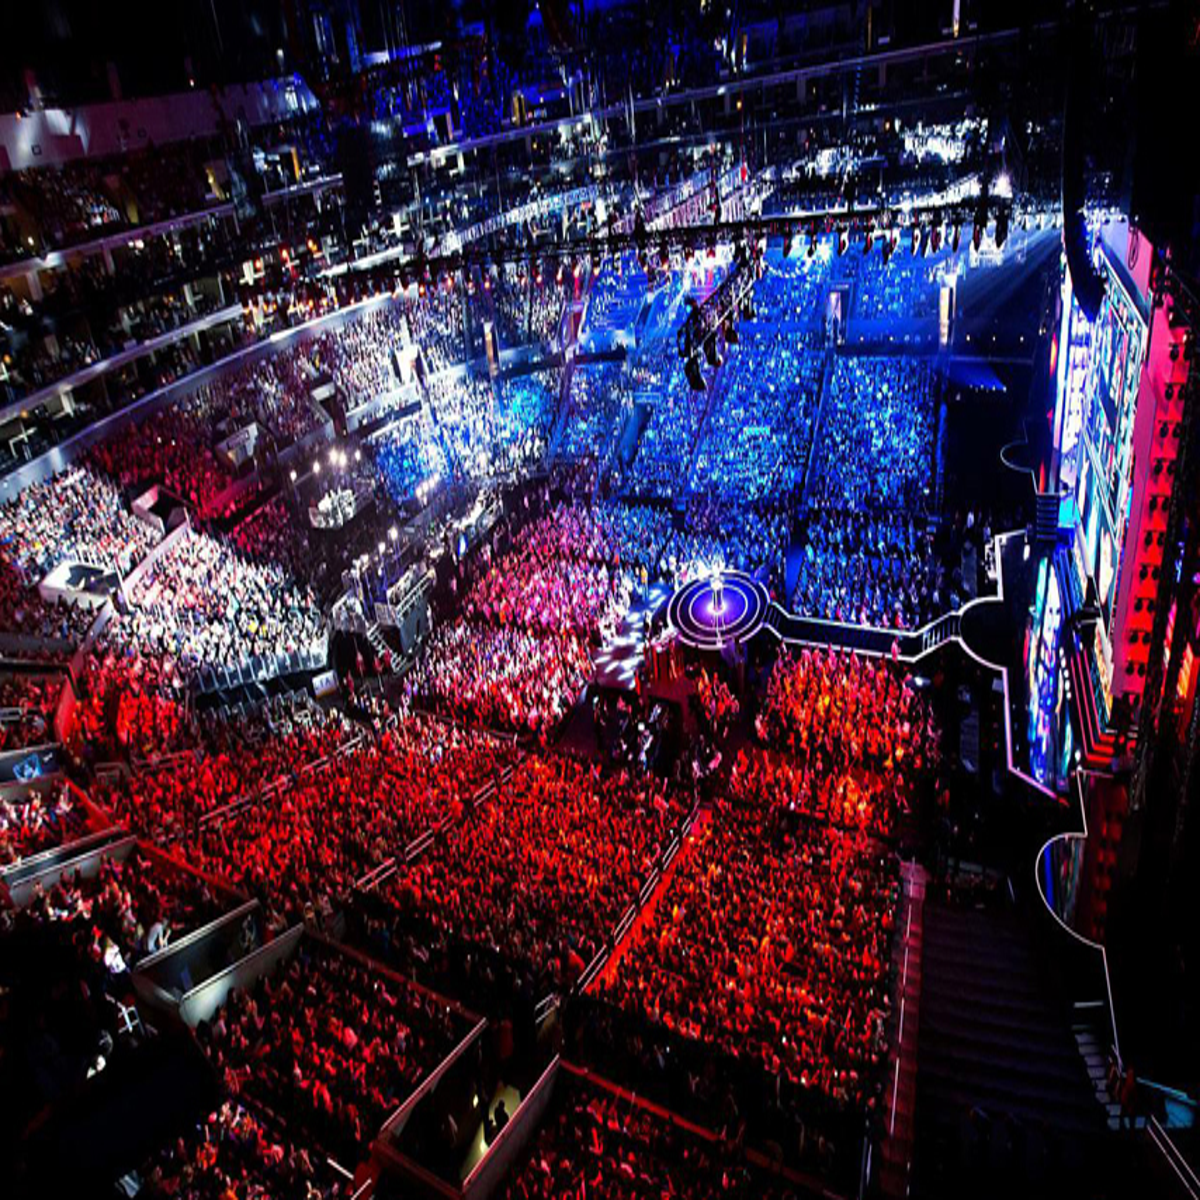 League of Legends 2015 World Championship broke a bunch of records - Polygon